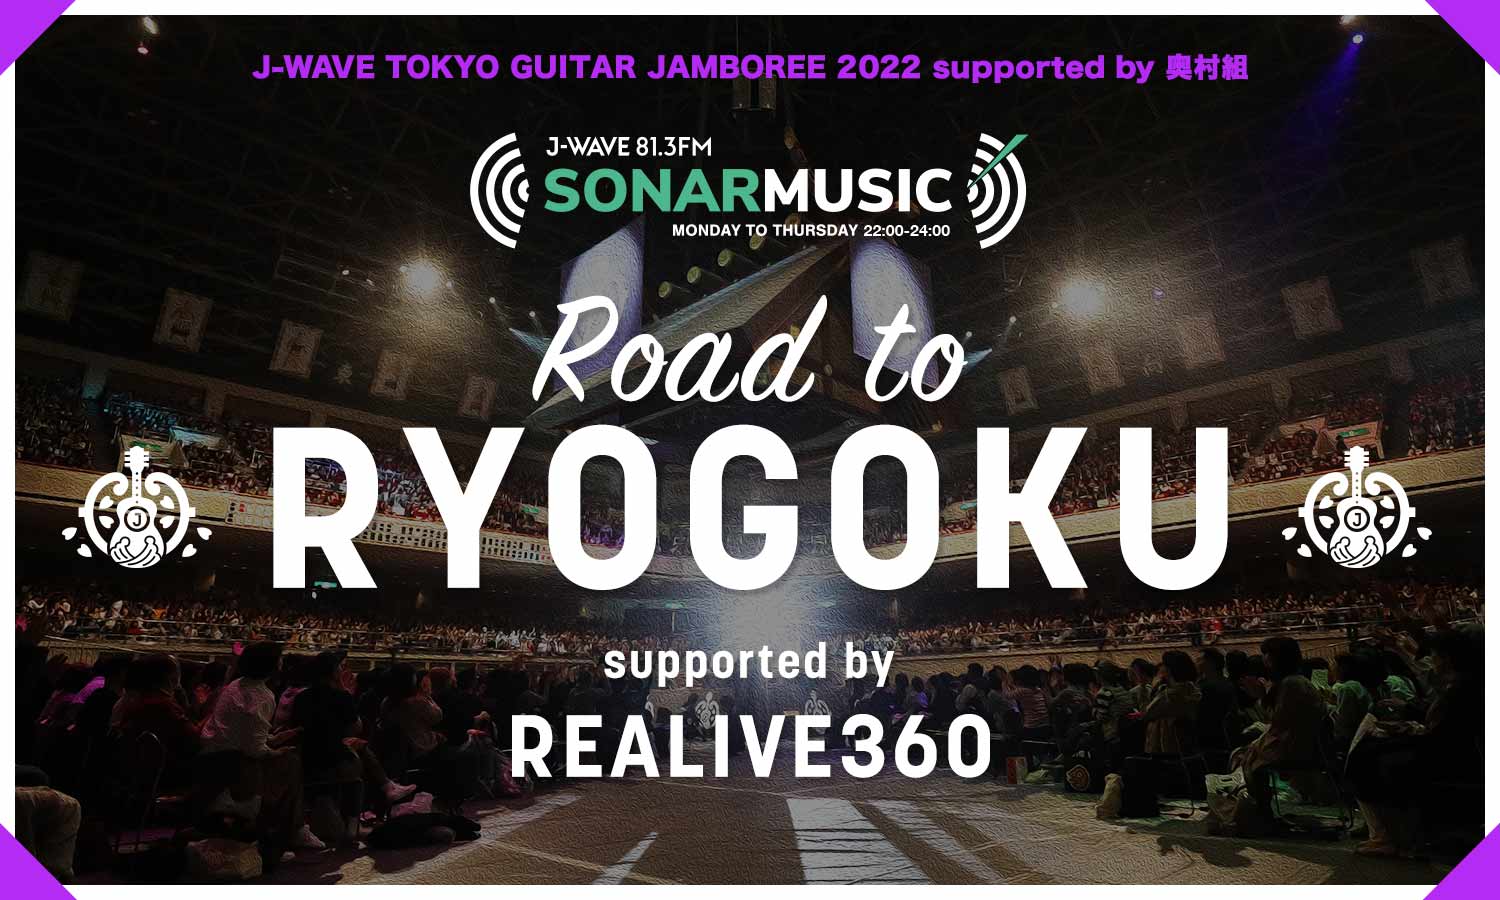 SONAR MUSIC Road to RYOGOKU supported by REALIVE360